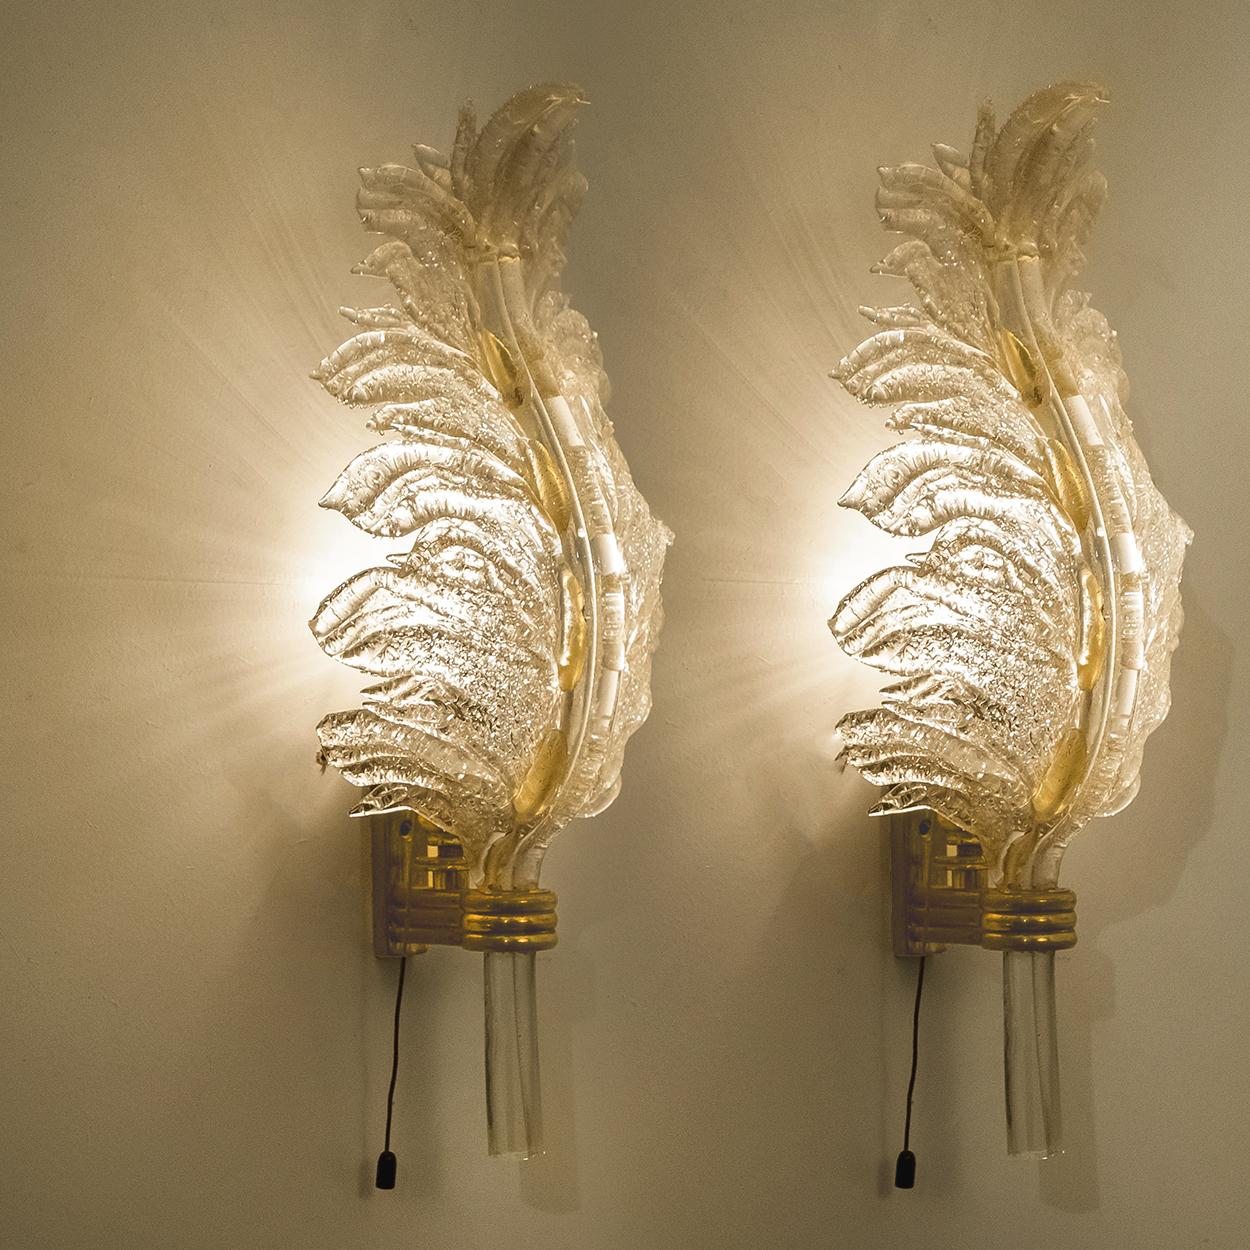 Brass Pair of Large Wall Sconces Barovier & Toso Gold Glass, Murano, Italy